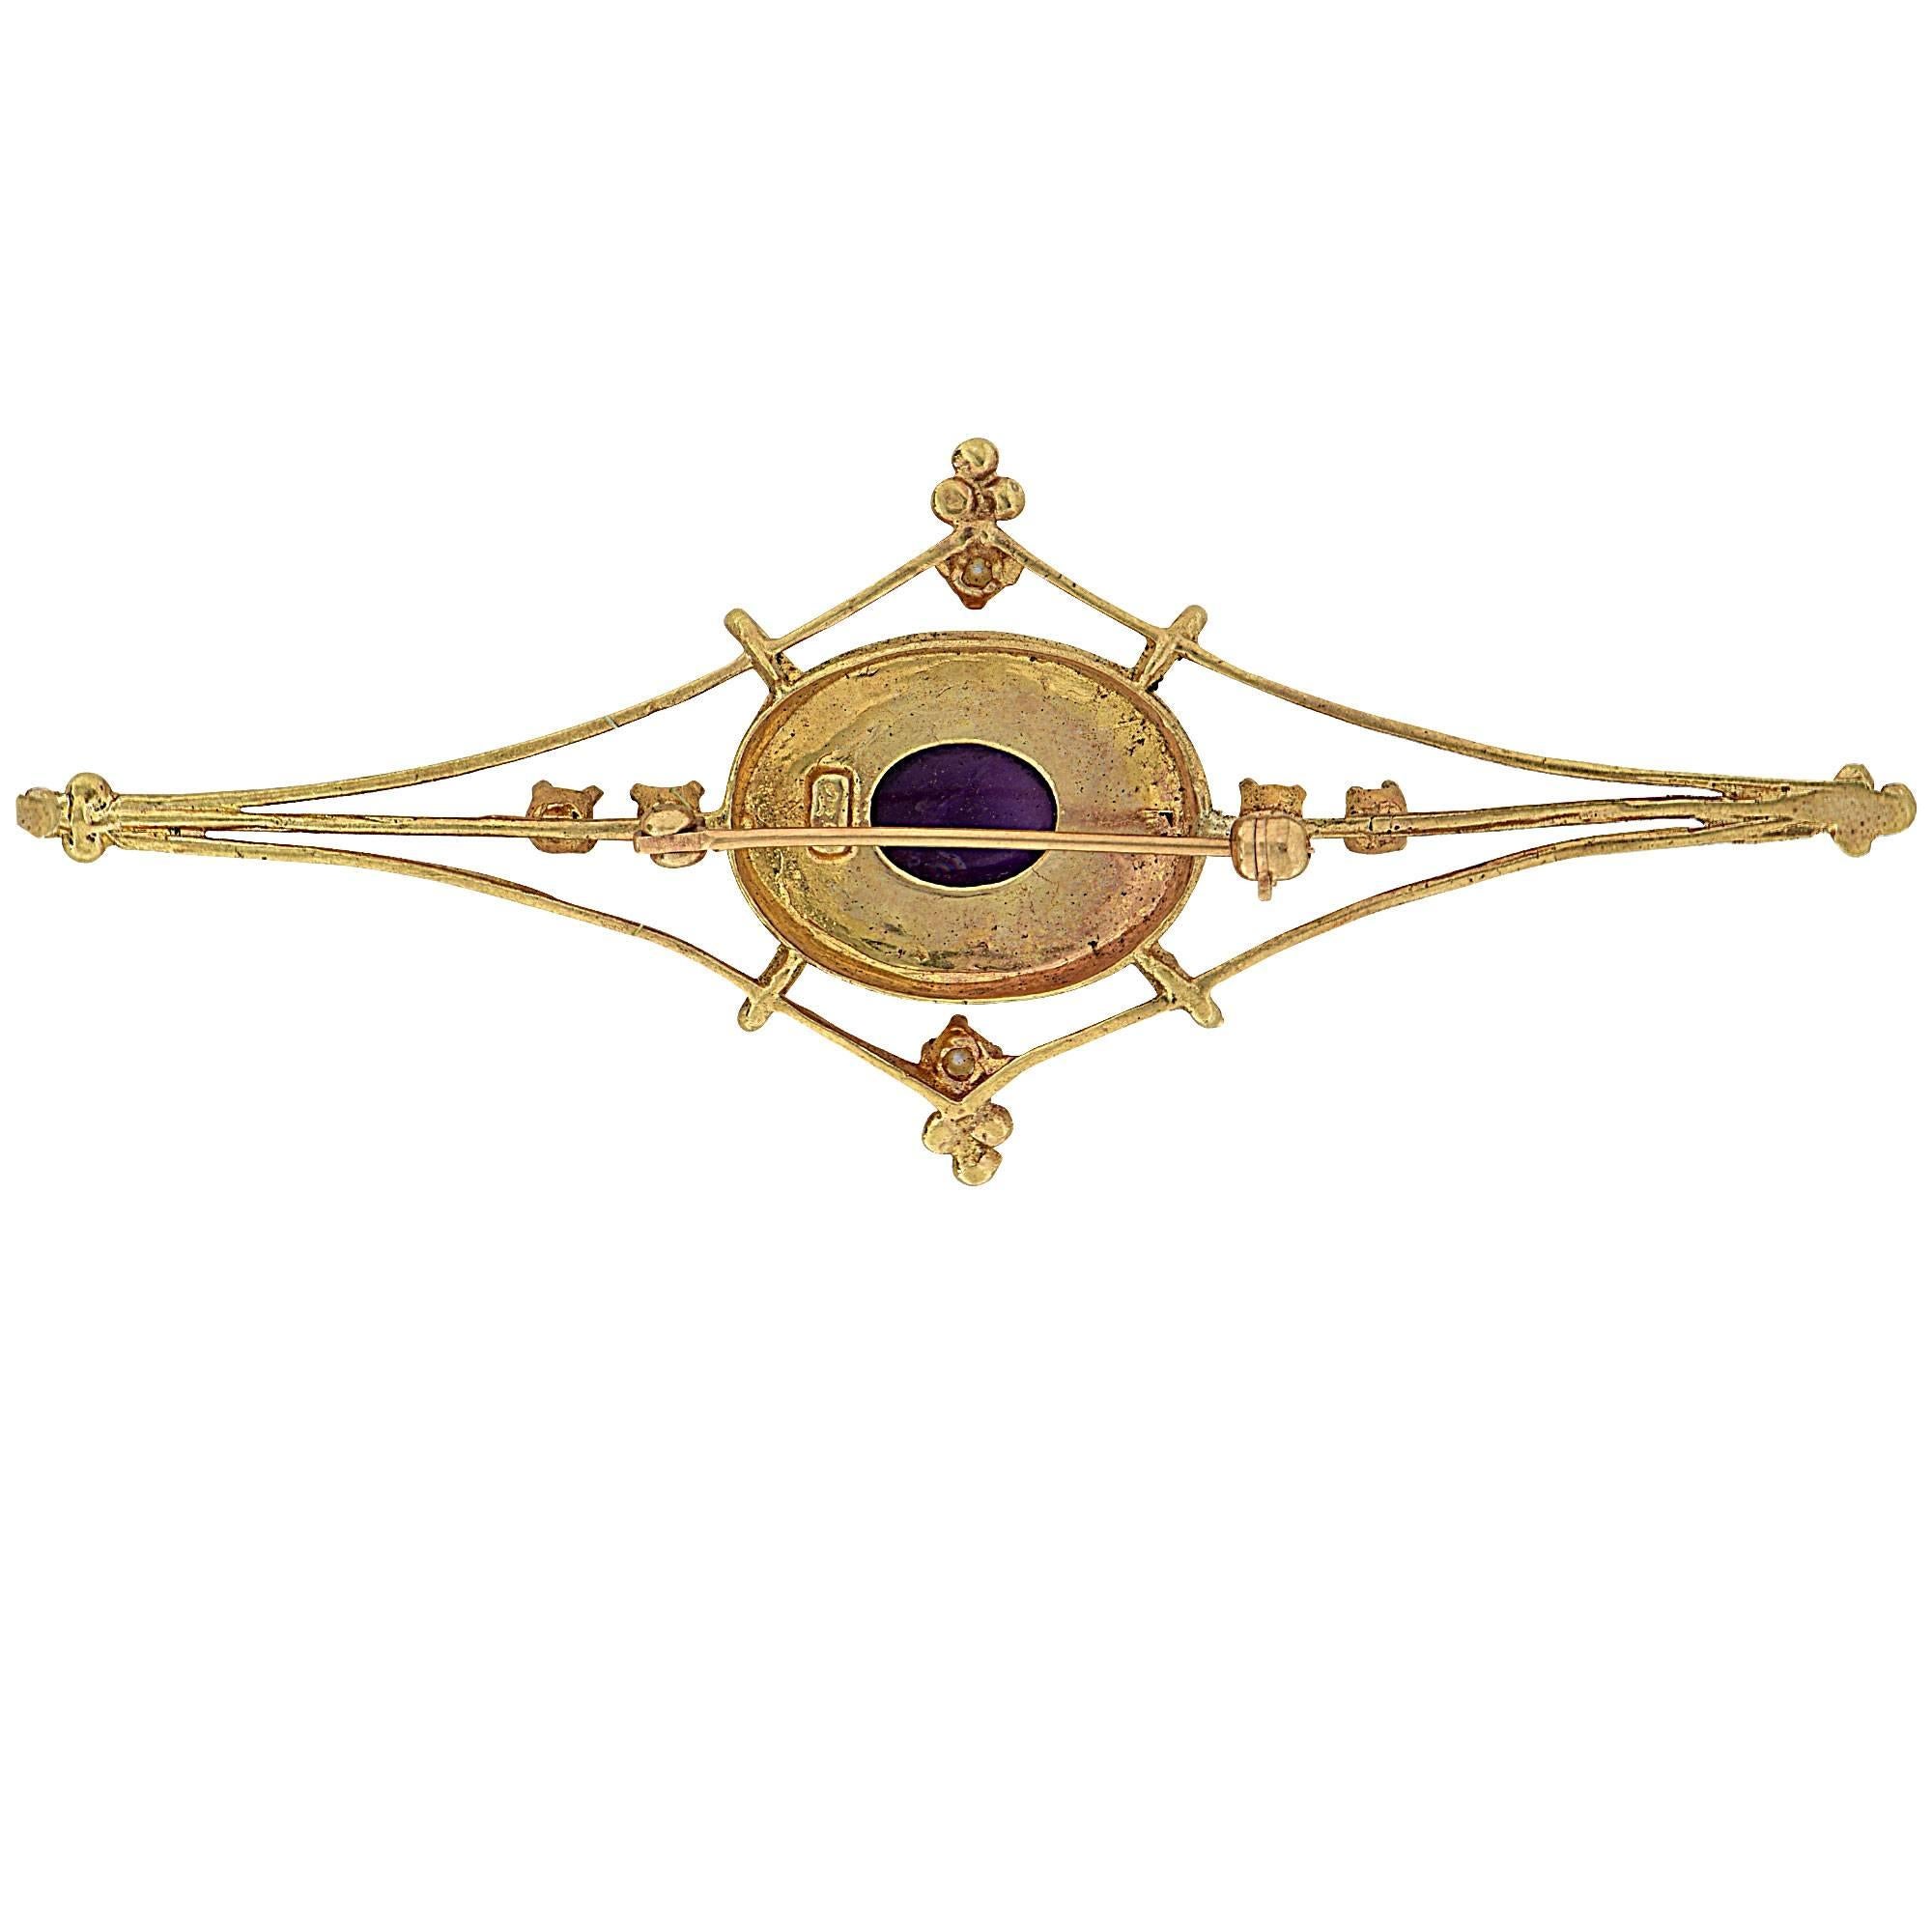 14k yellow gold brooch featuring an Amethyst cabochon accented by seed pearls.

Metal weight:  grams

This brooch is accompanied by a retail appraisal performed by a GIA Graduate Gemologist.